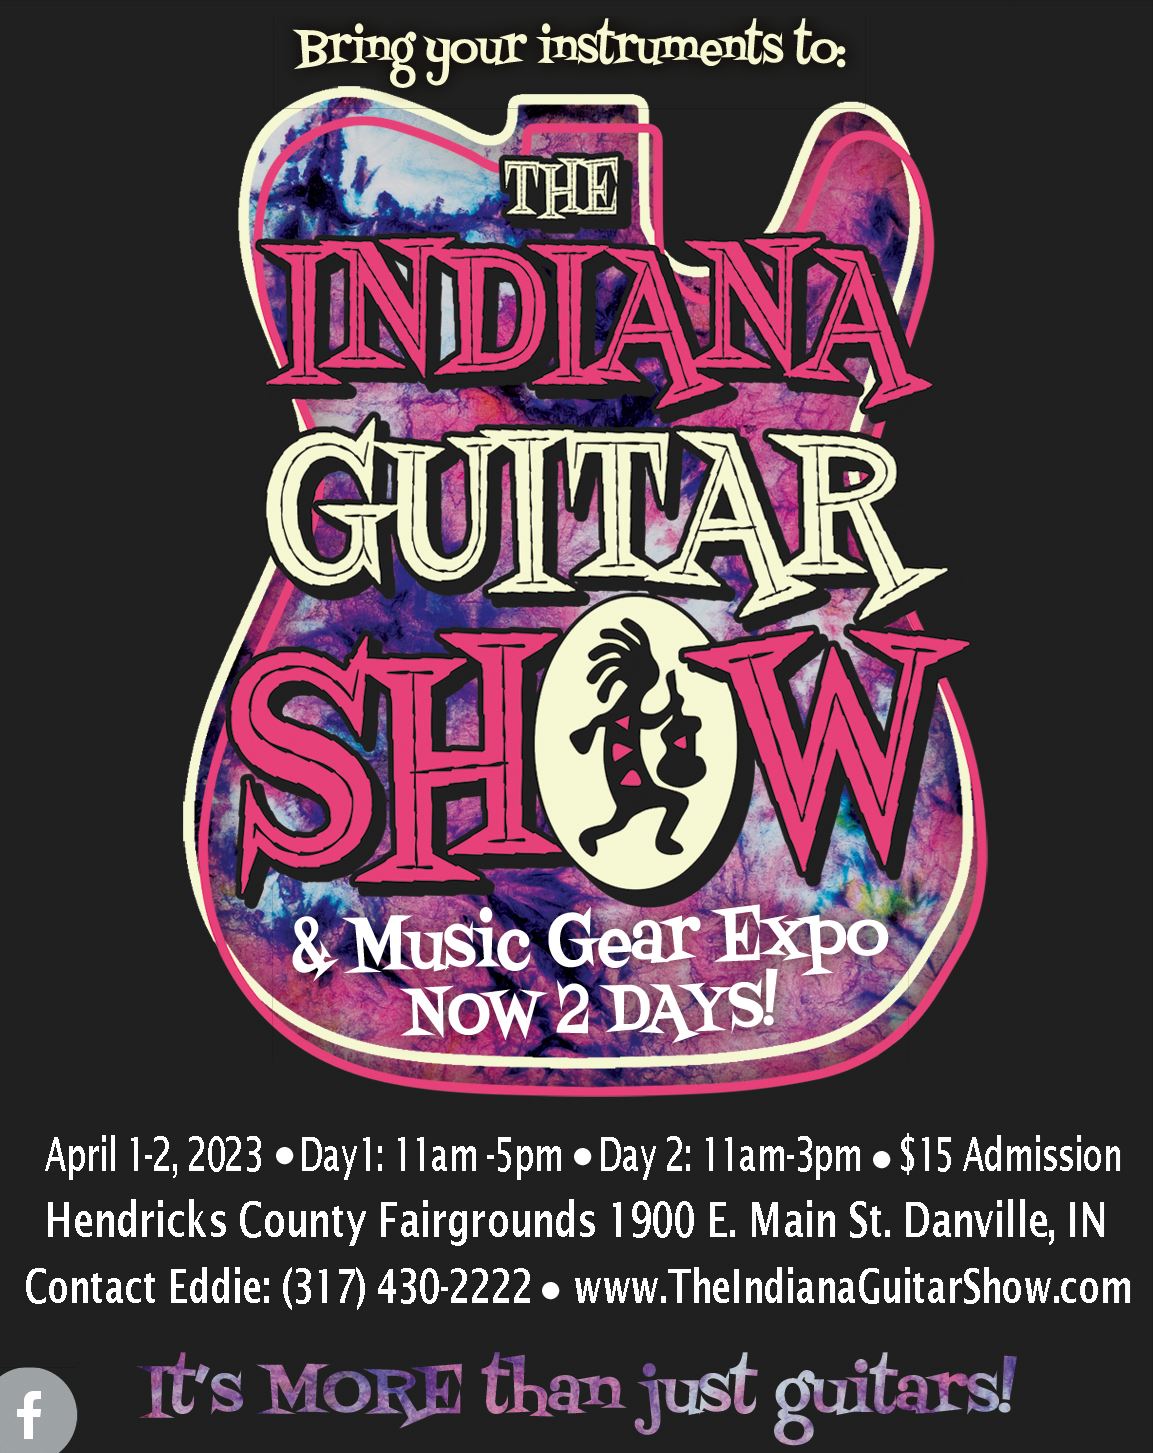 The Indiana Guitar Show